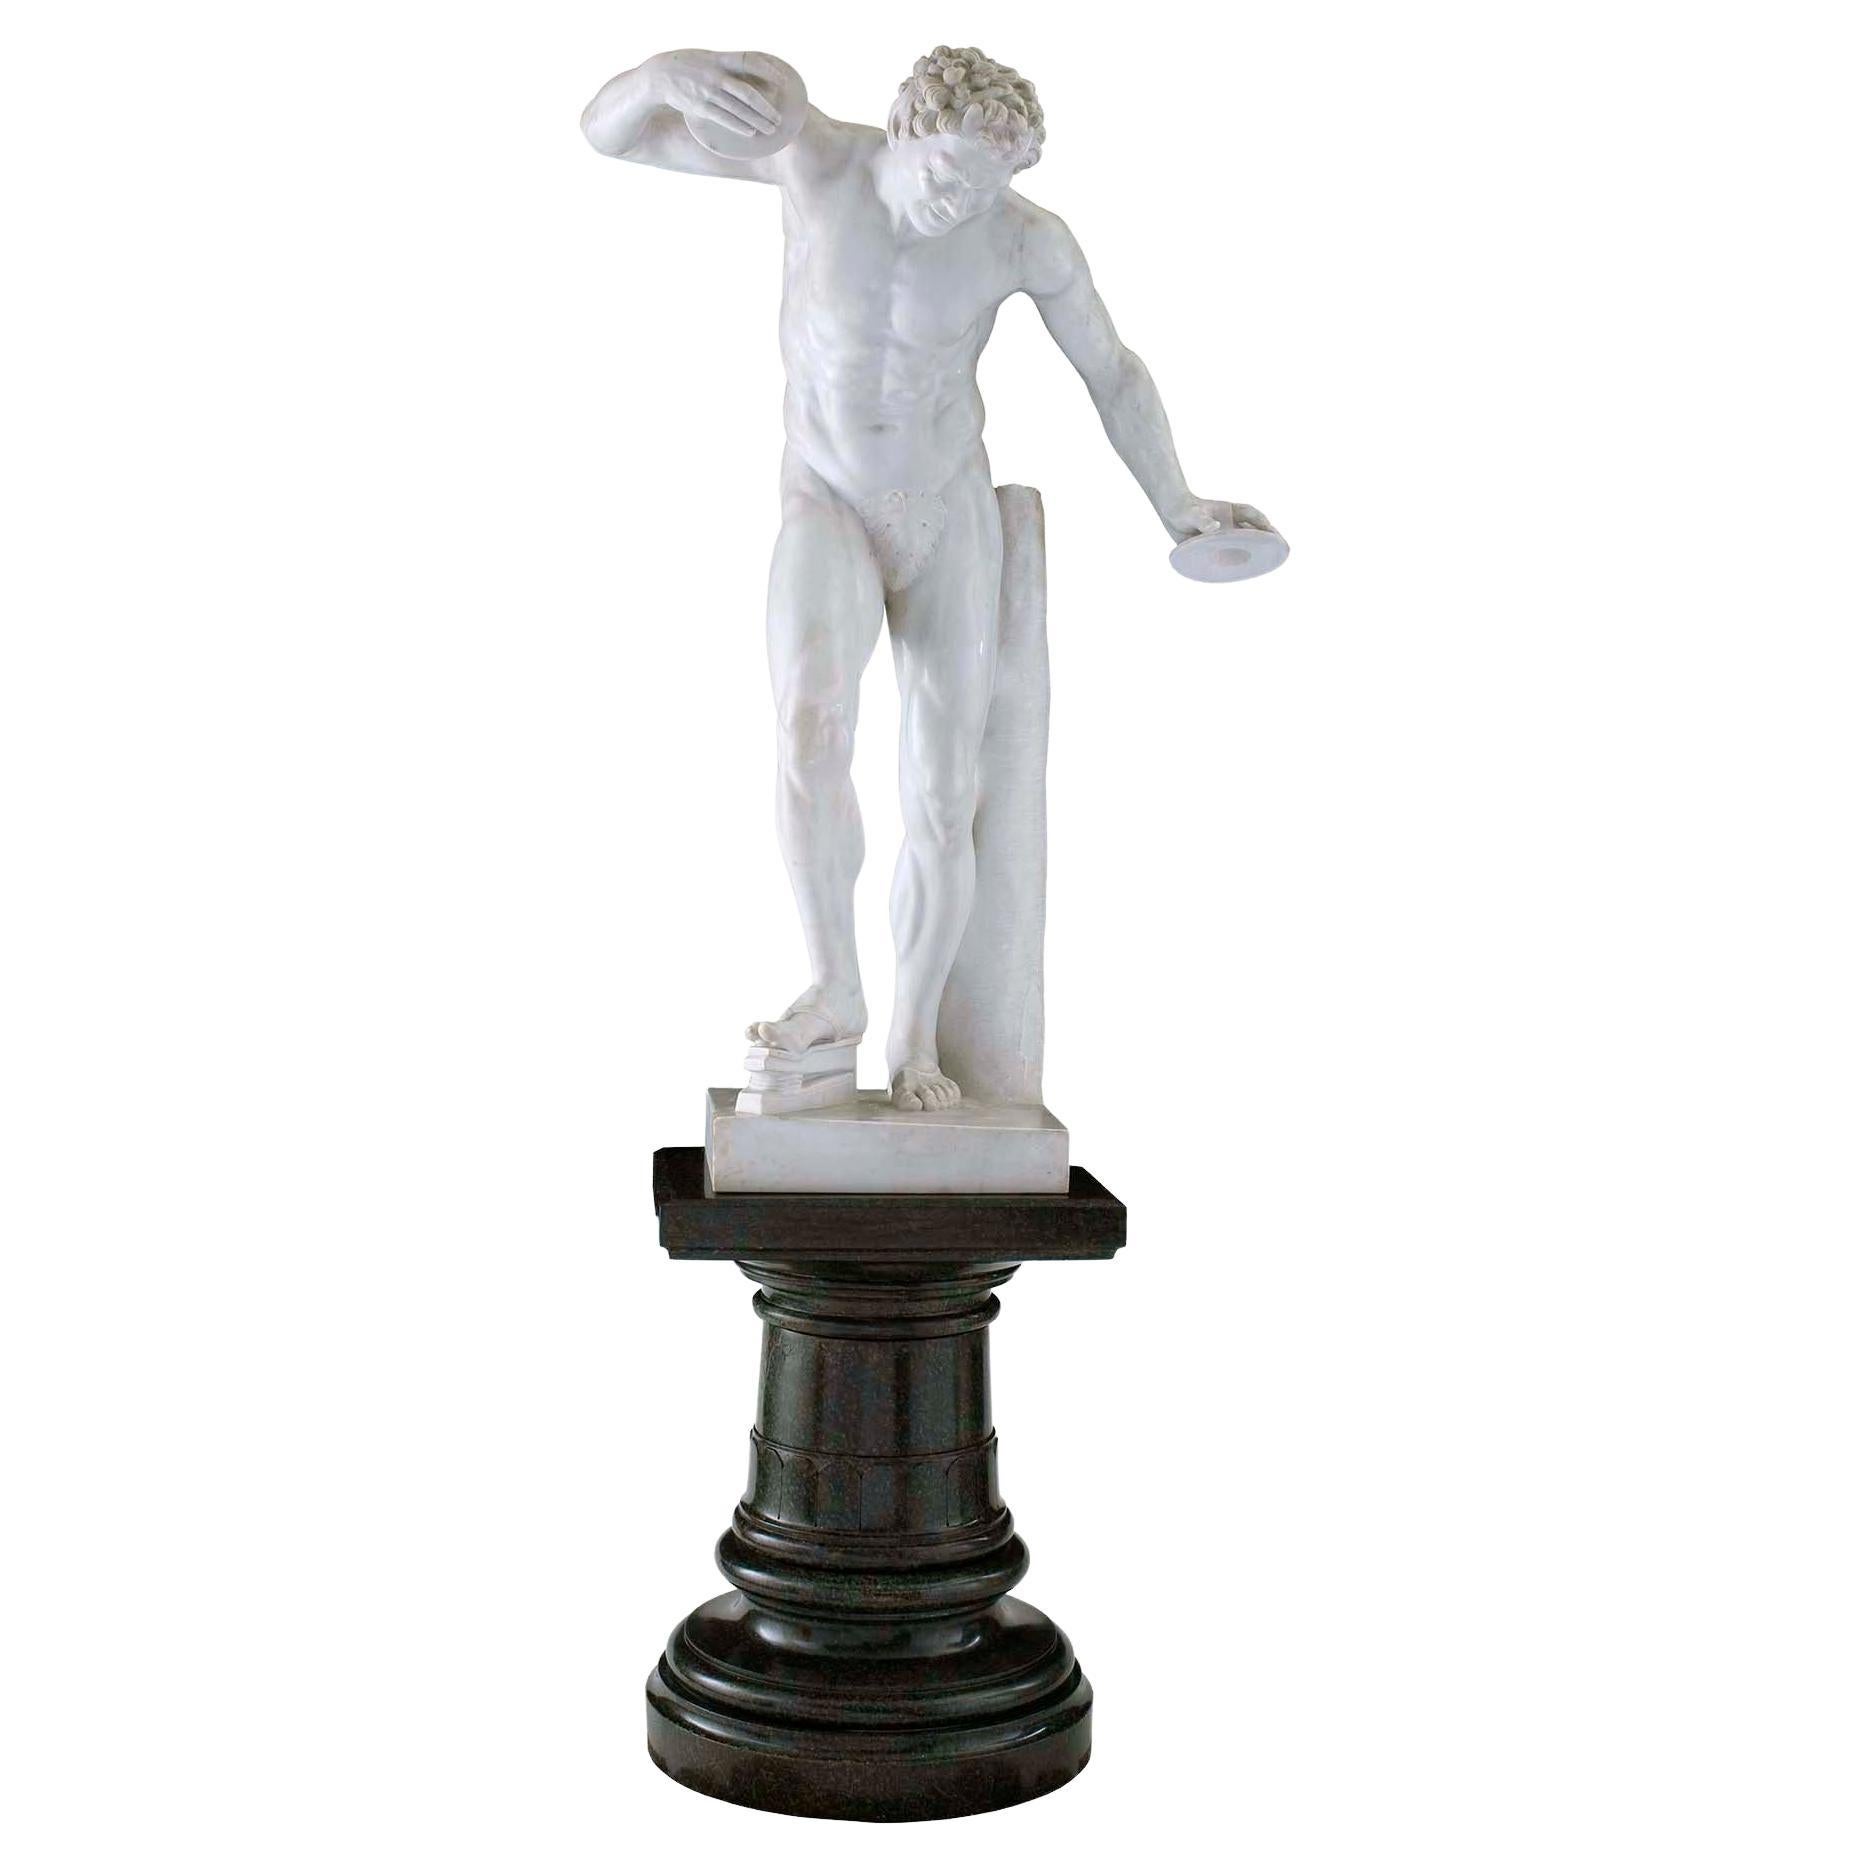 Italian 19th Century Neoclassical Style Marble Statue of a Faun with Cymbals